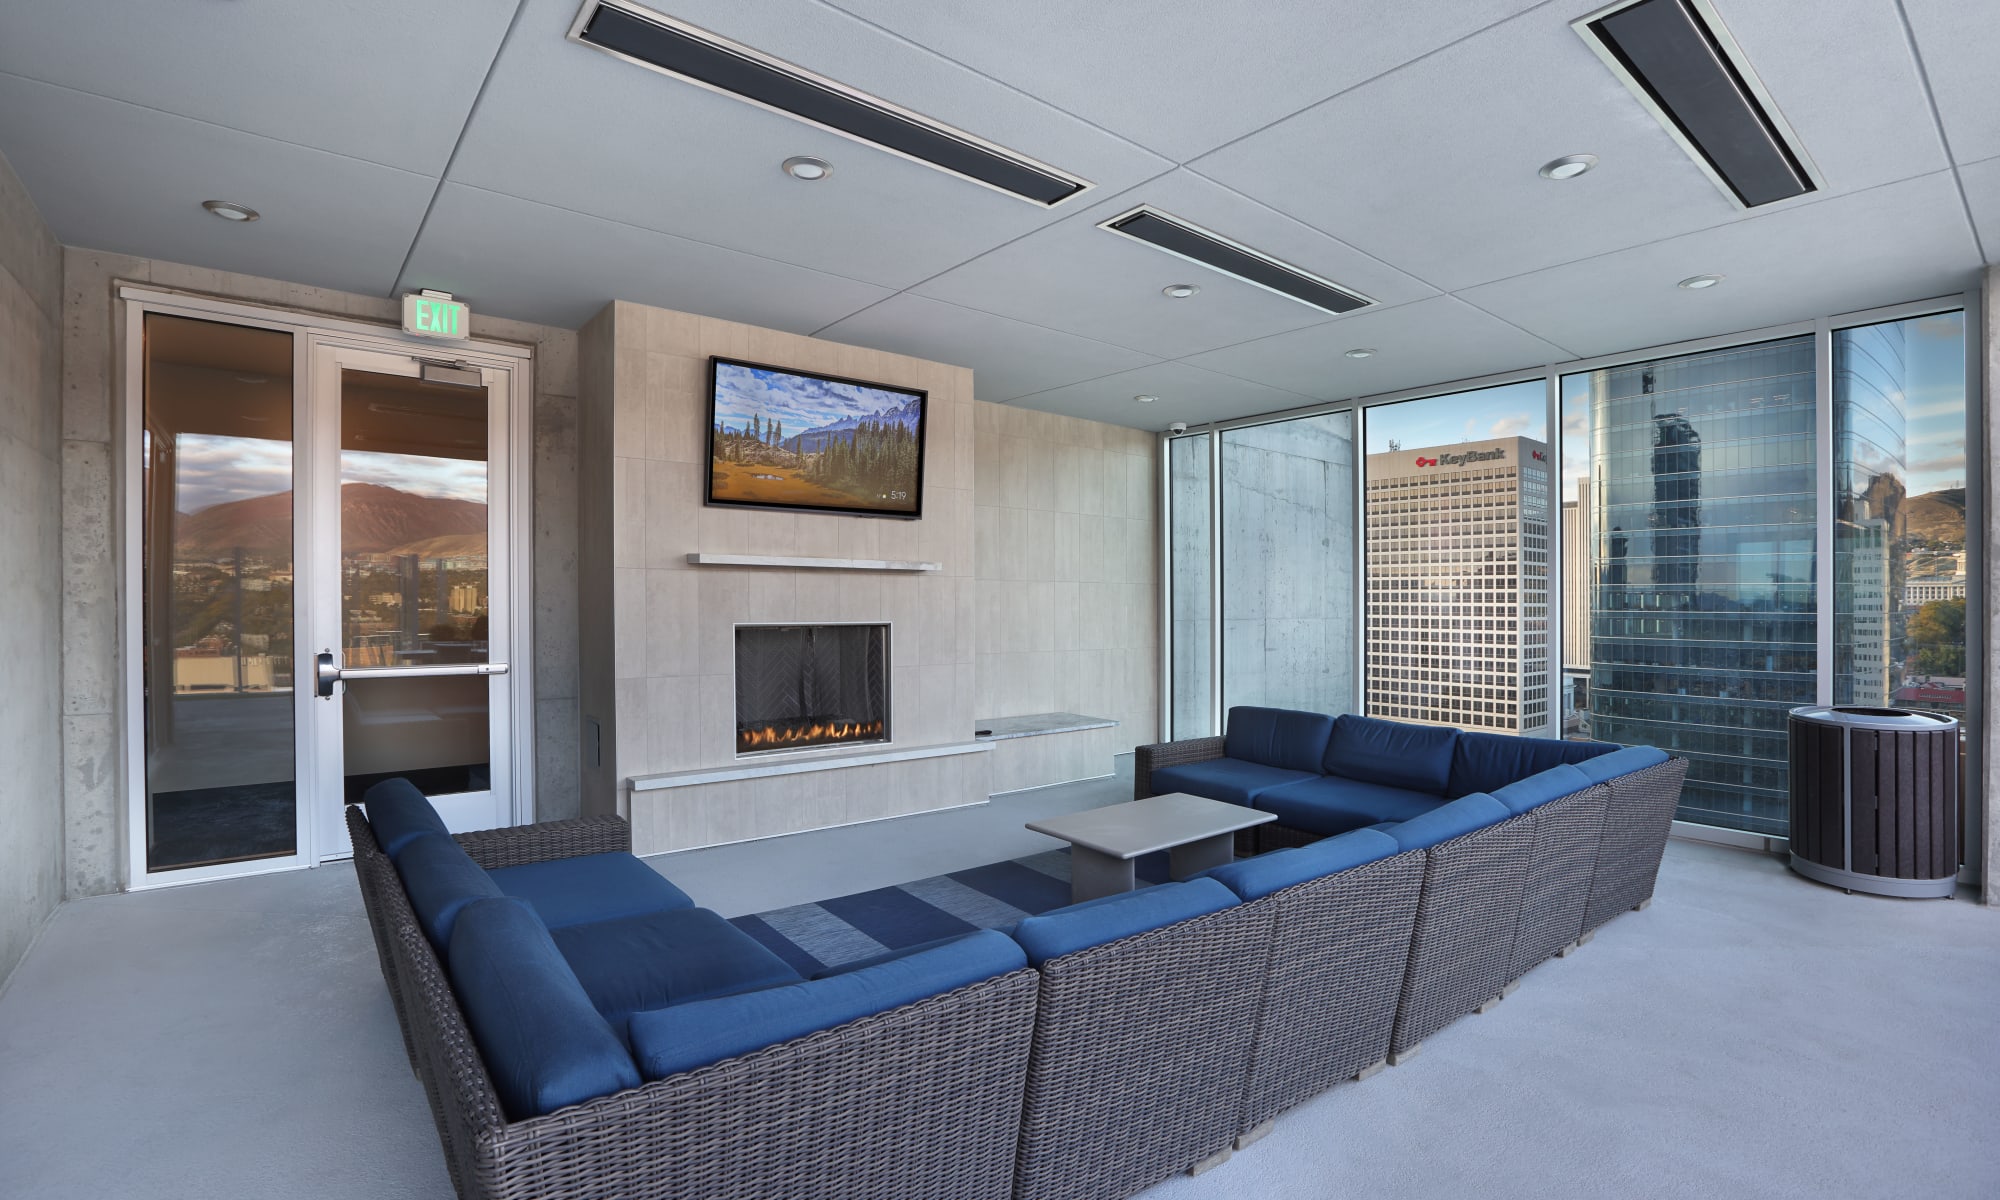 21st floor rooftop lounge with fireplace and television at Luxury high-rise community of Liberty SKY in Salt Lake City, Utah